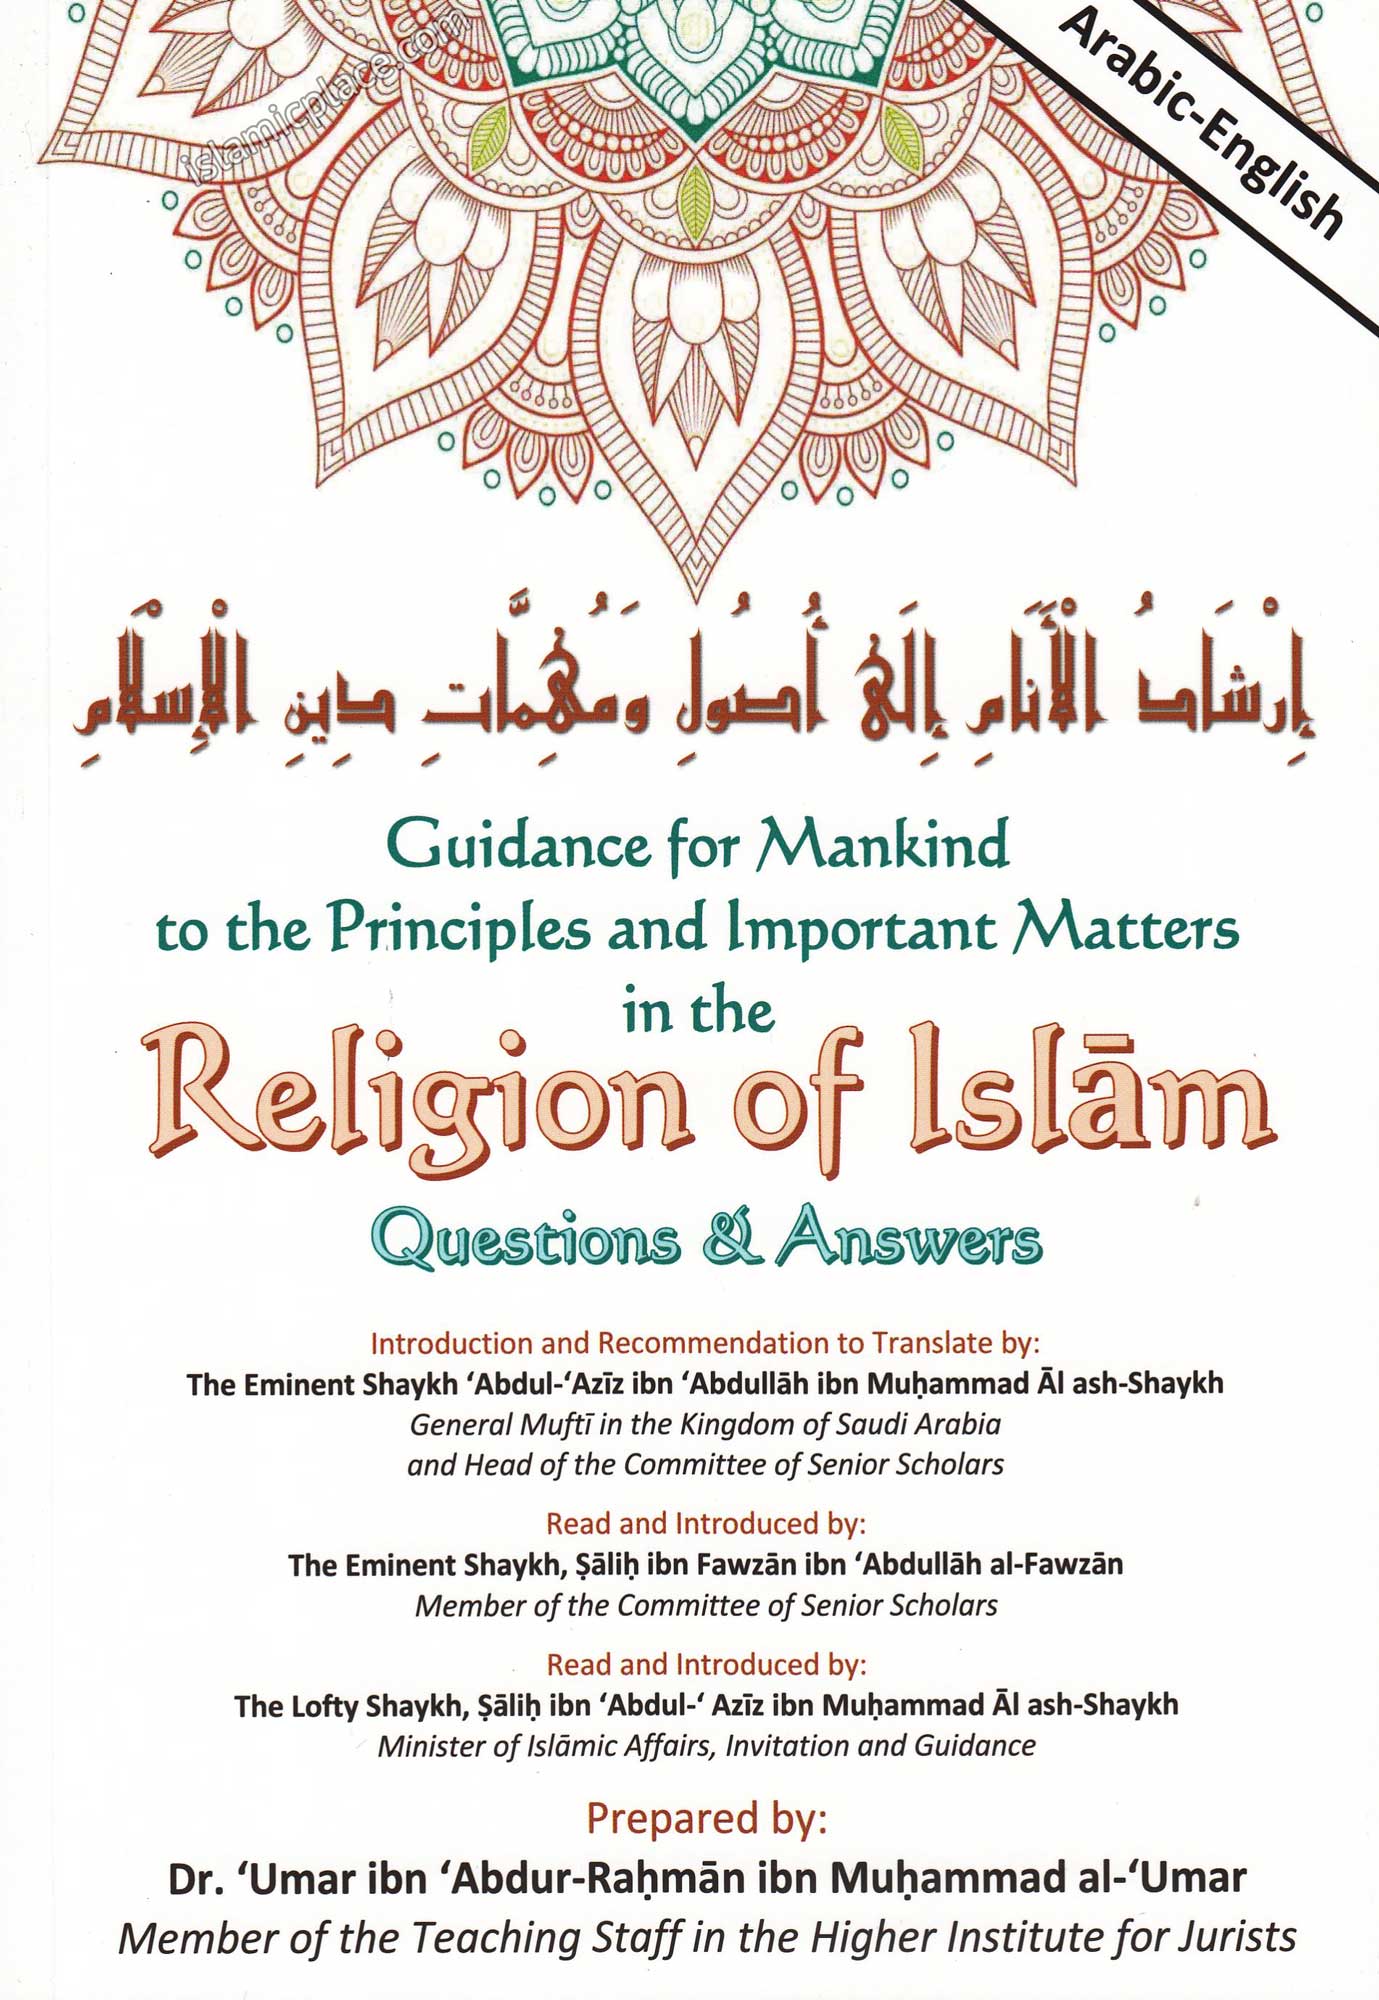 Religion of Islam Questions & Answers - Guidance for Mankind to the Principles and Important Matters in the Religion of Islam